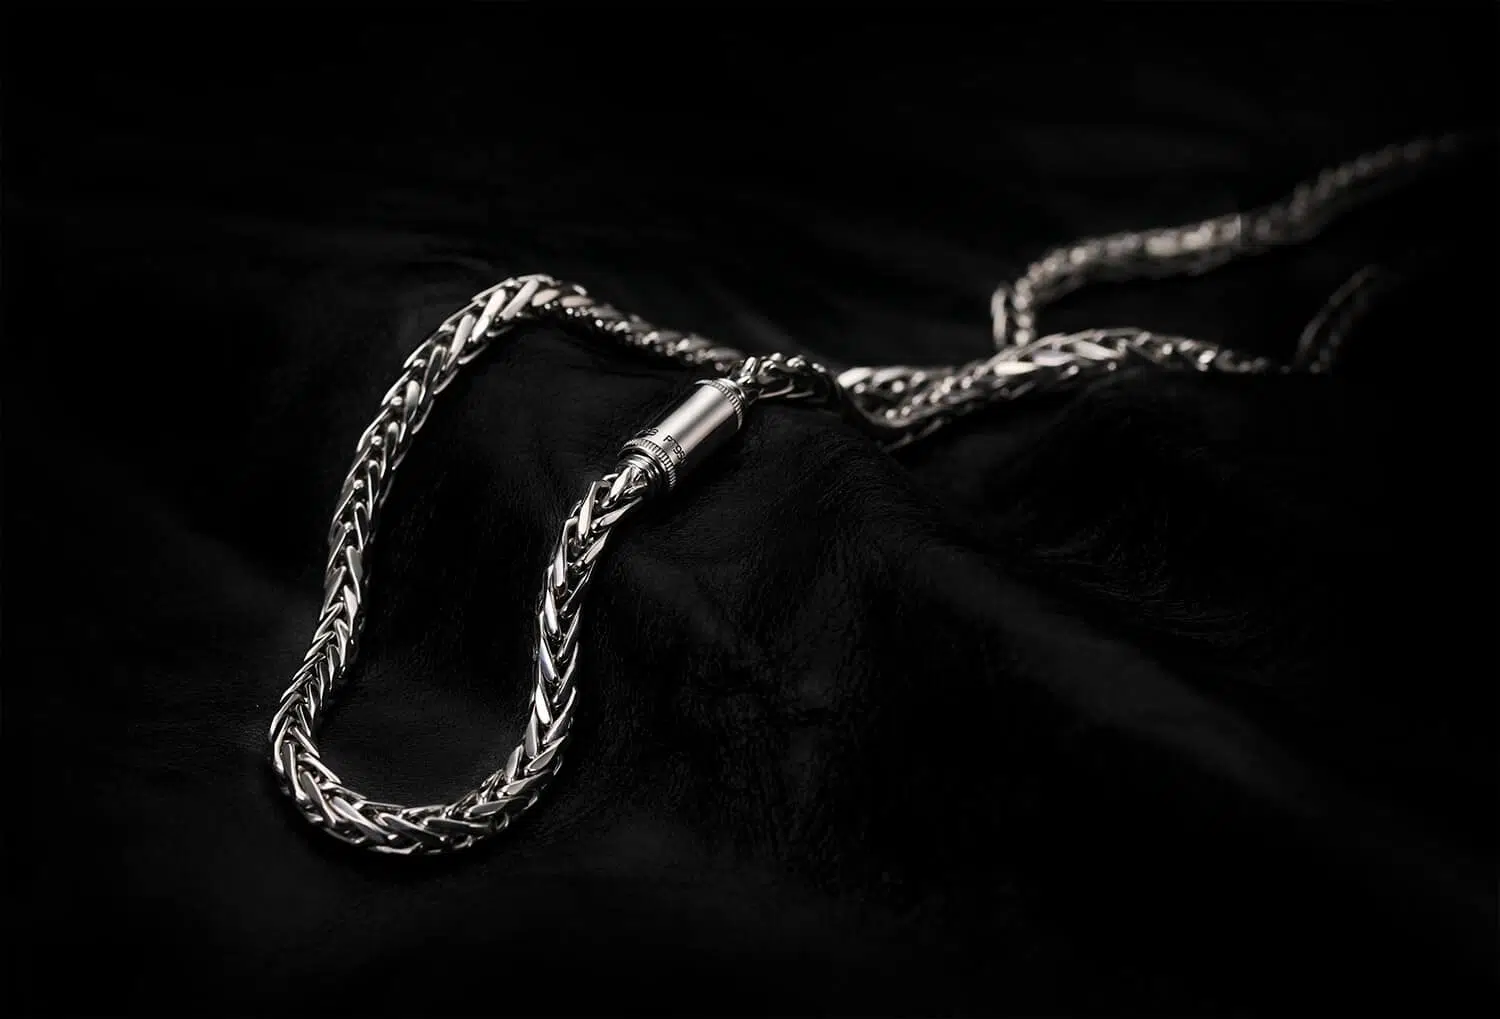 A clasp of a men's platinum wheat chain necklace designed by ByEnzo Jewelry with engraving on the chain